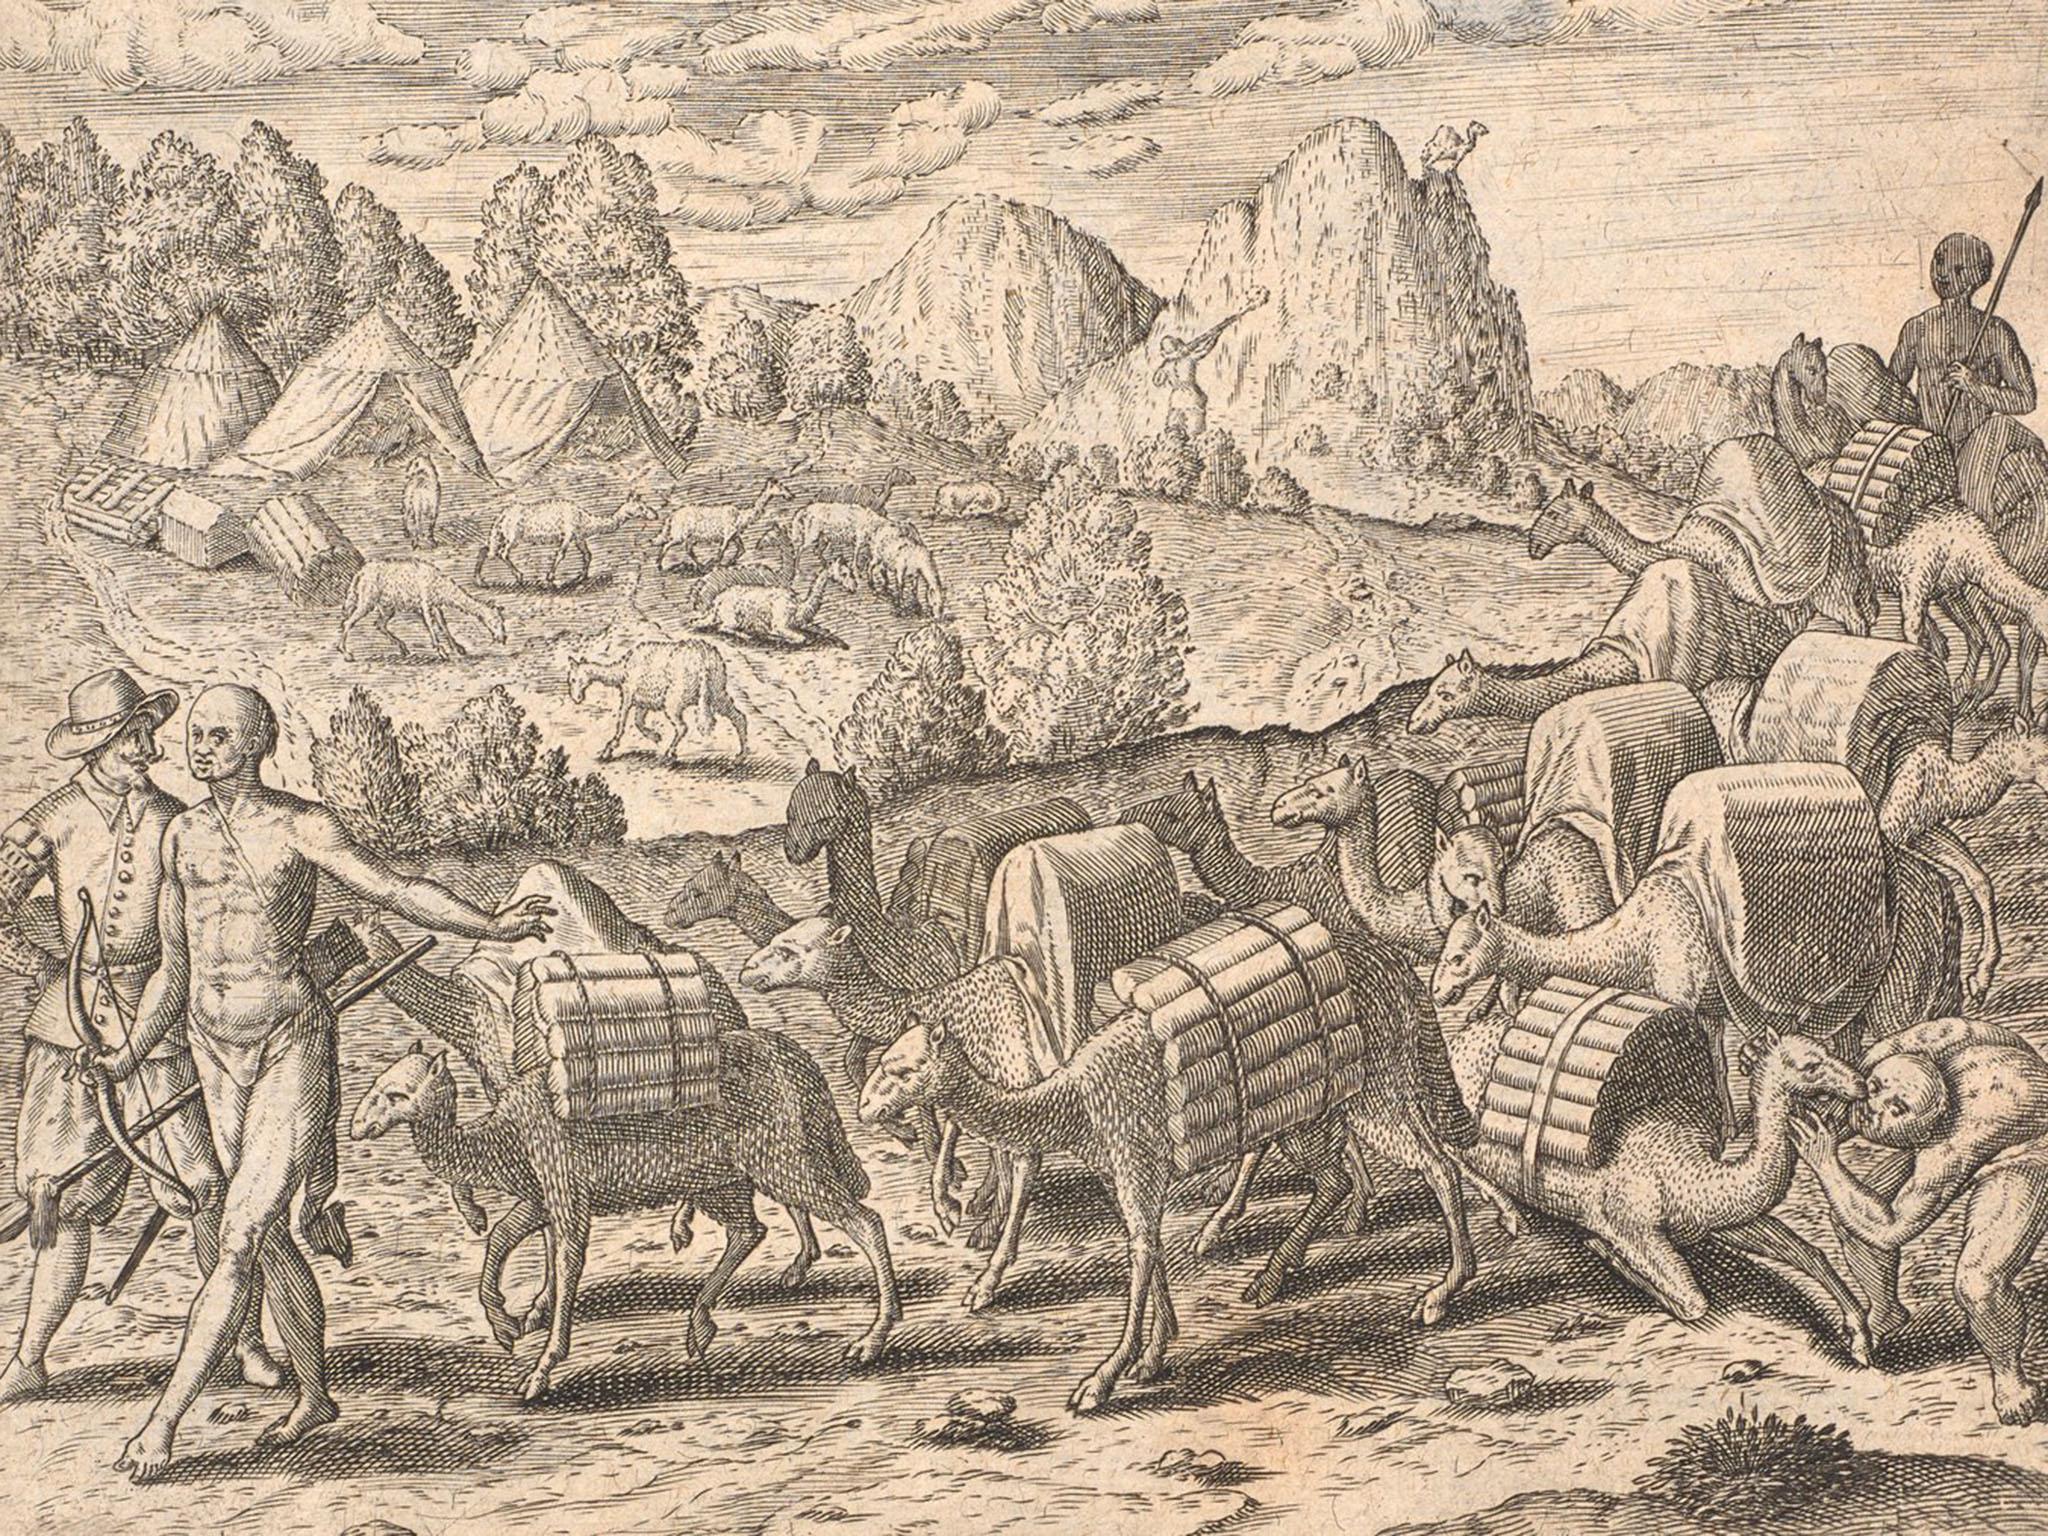 Llamas transporting bars of silver across the Andes, by Theodore de Bry (Frankfurt, 1602) (Author provided)